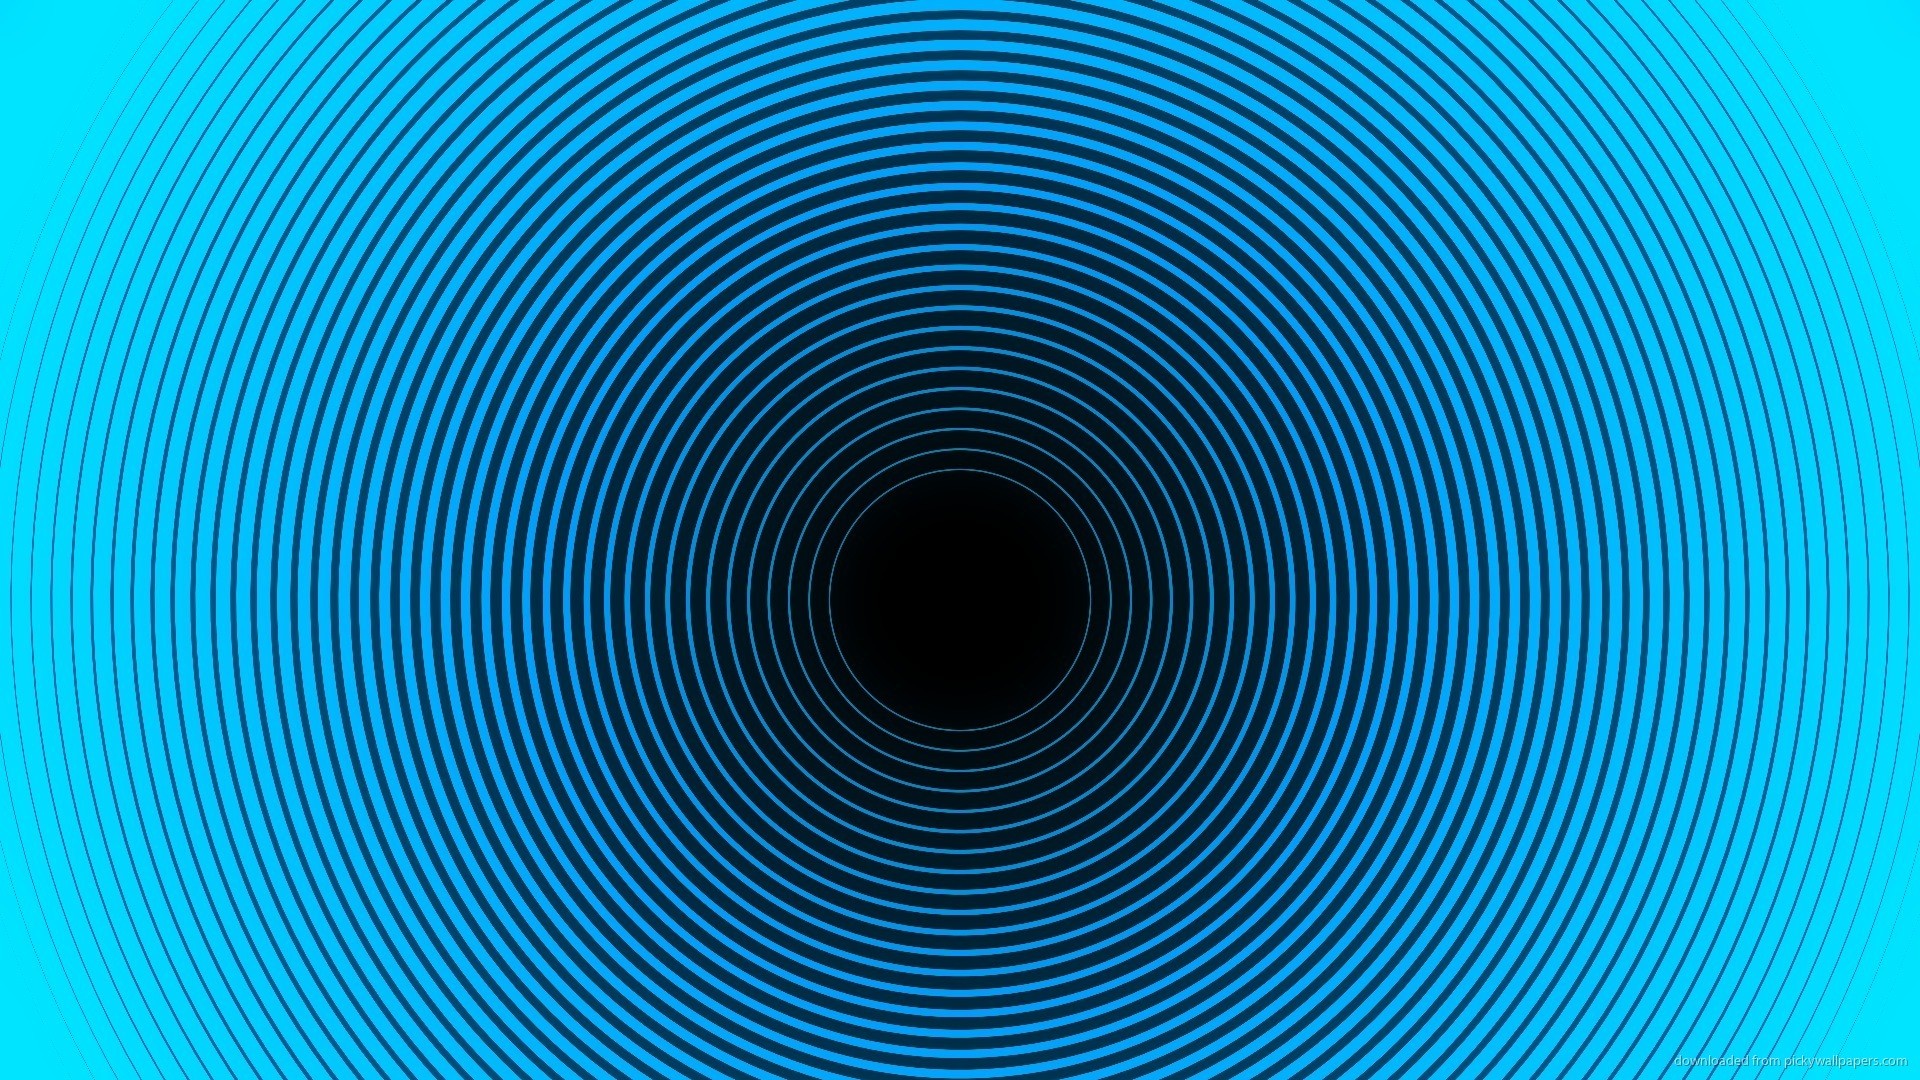 Blue and Black Optical Illusion Wallpaper picture